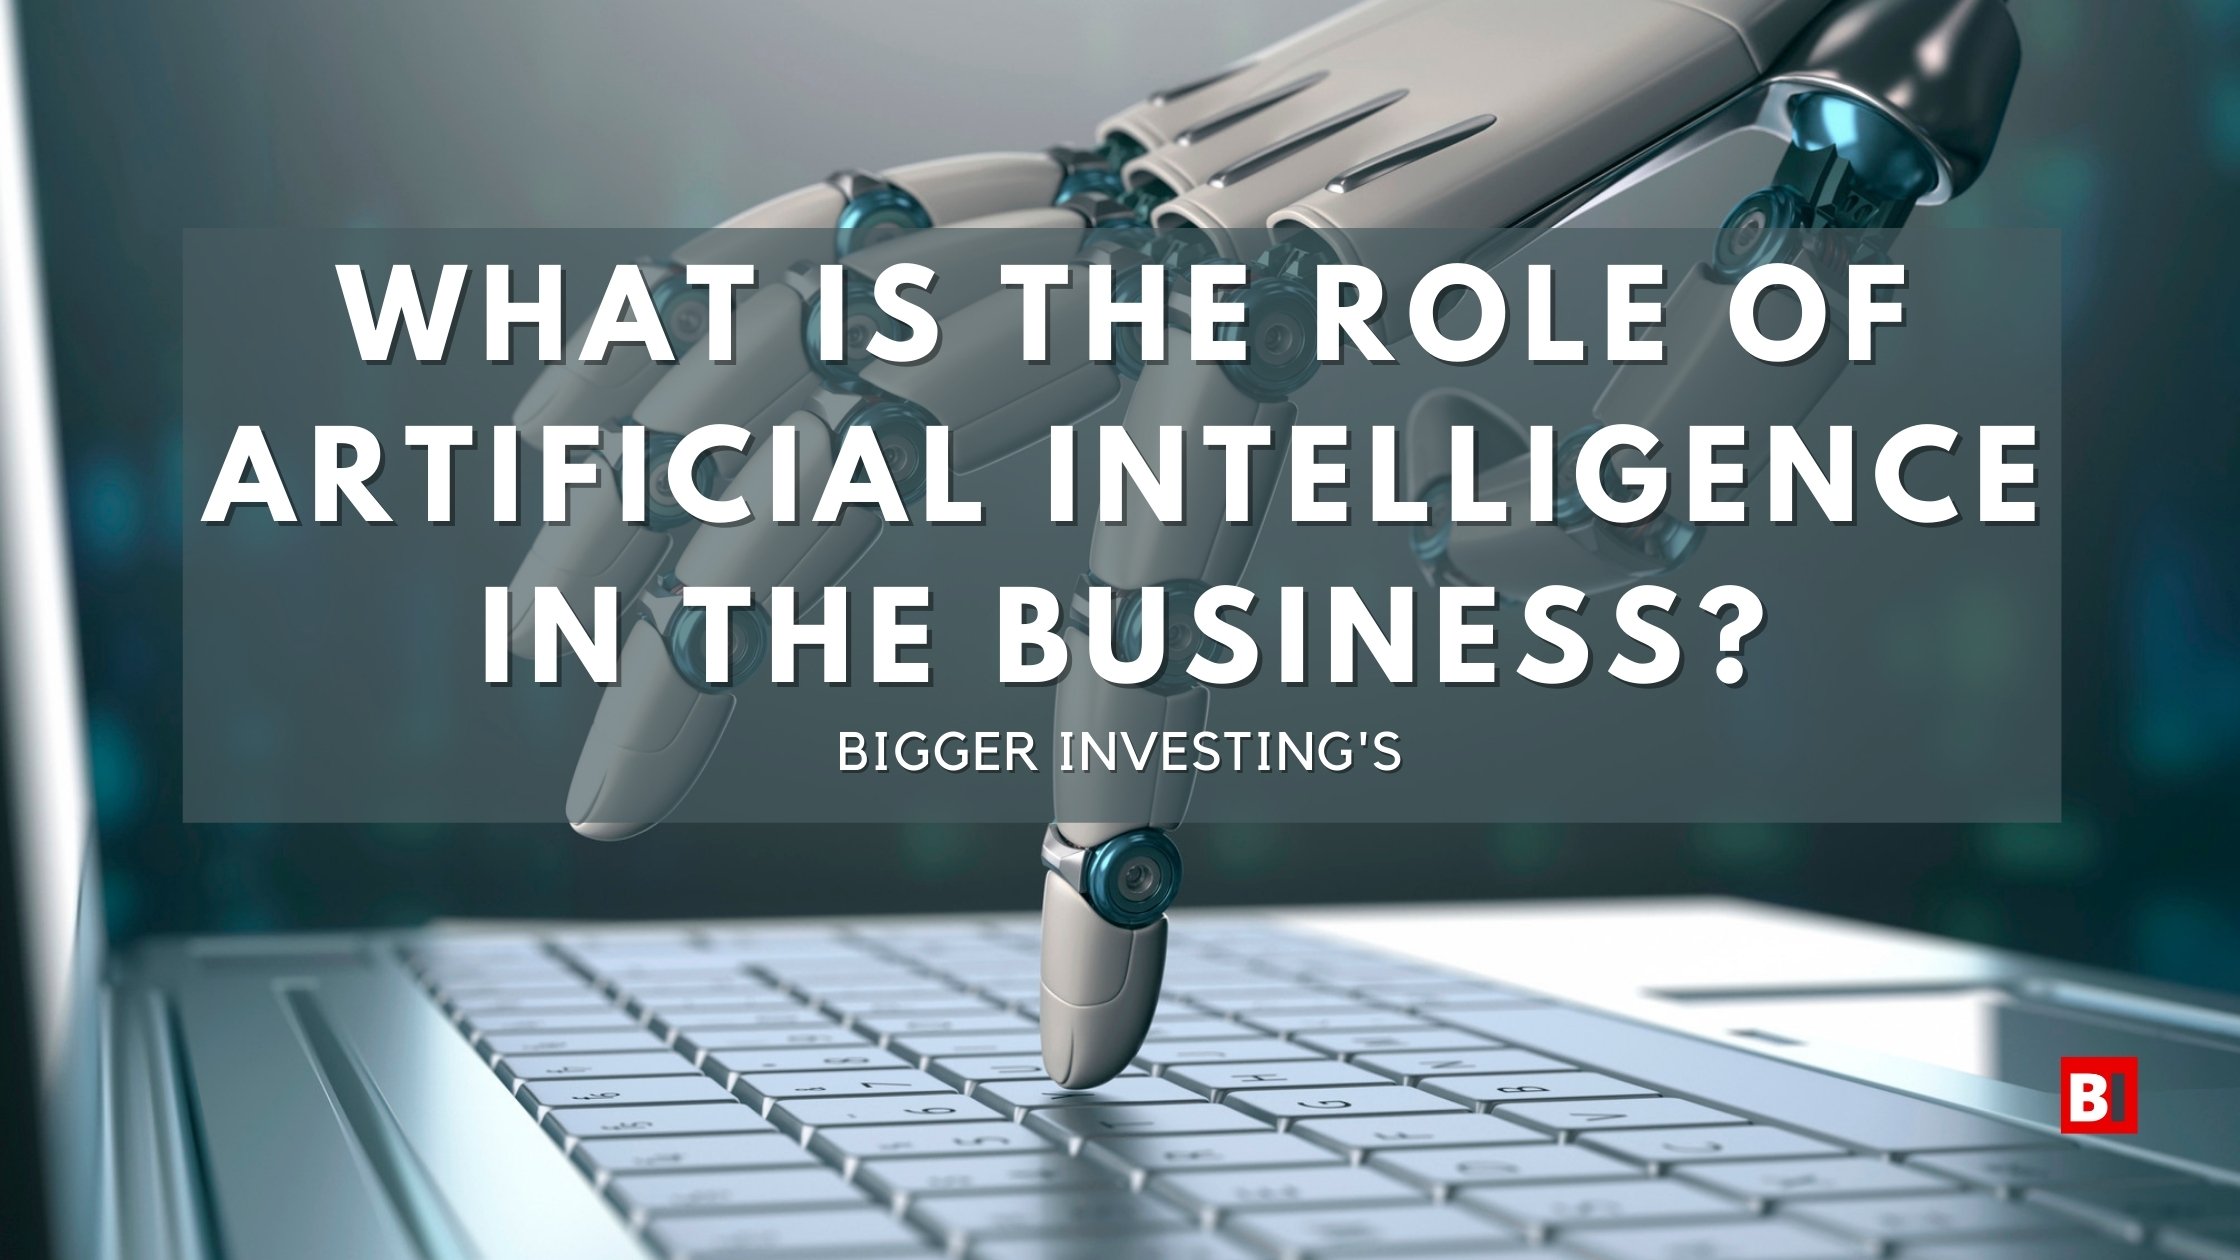 Artificial Intelligence in business